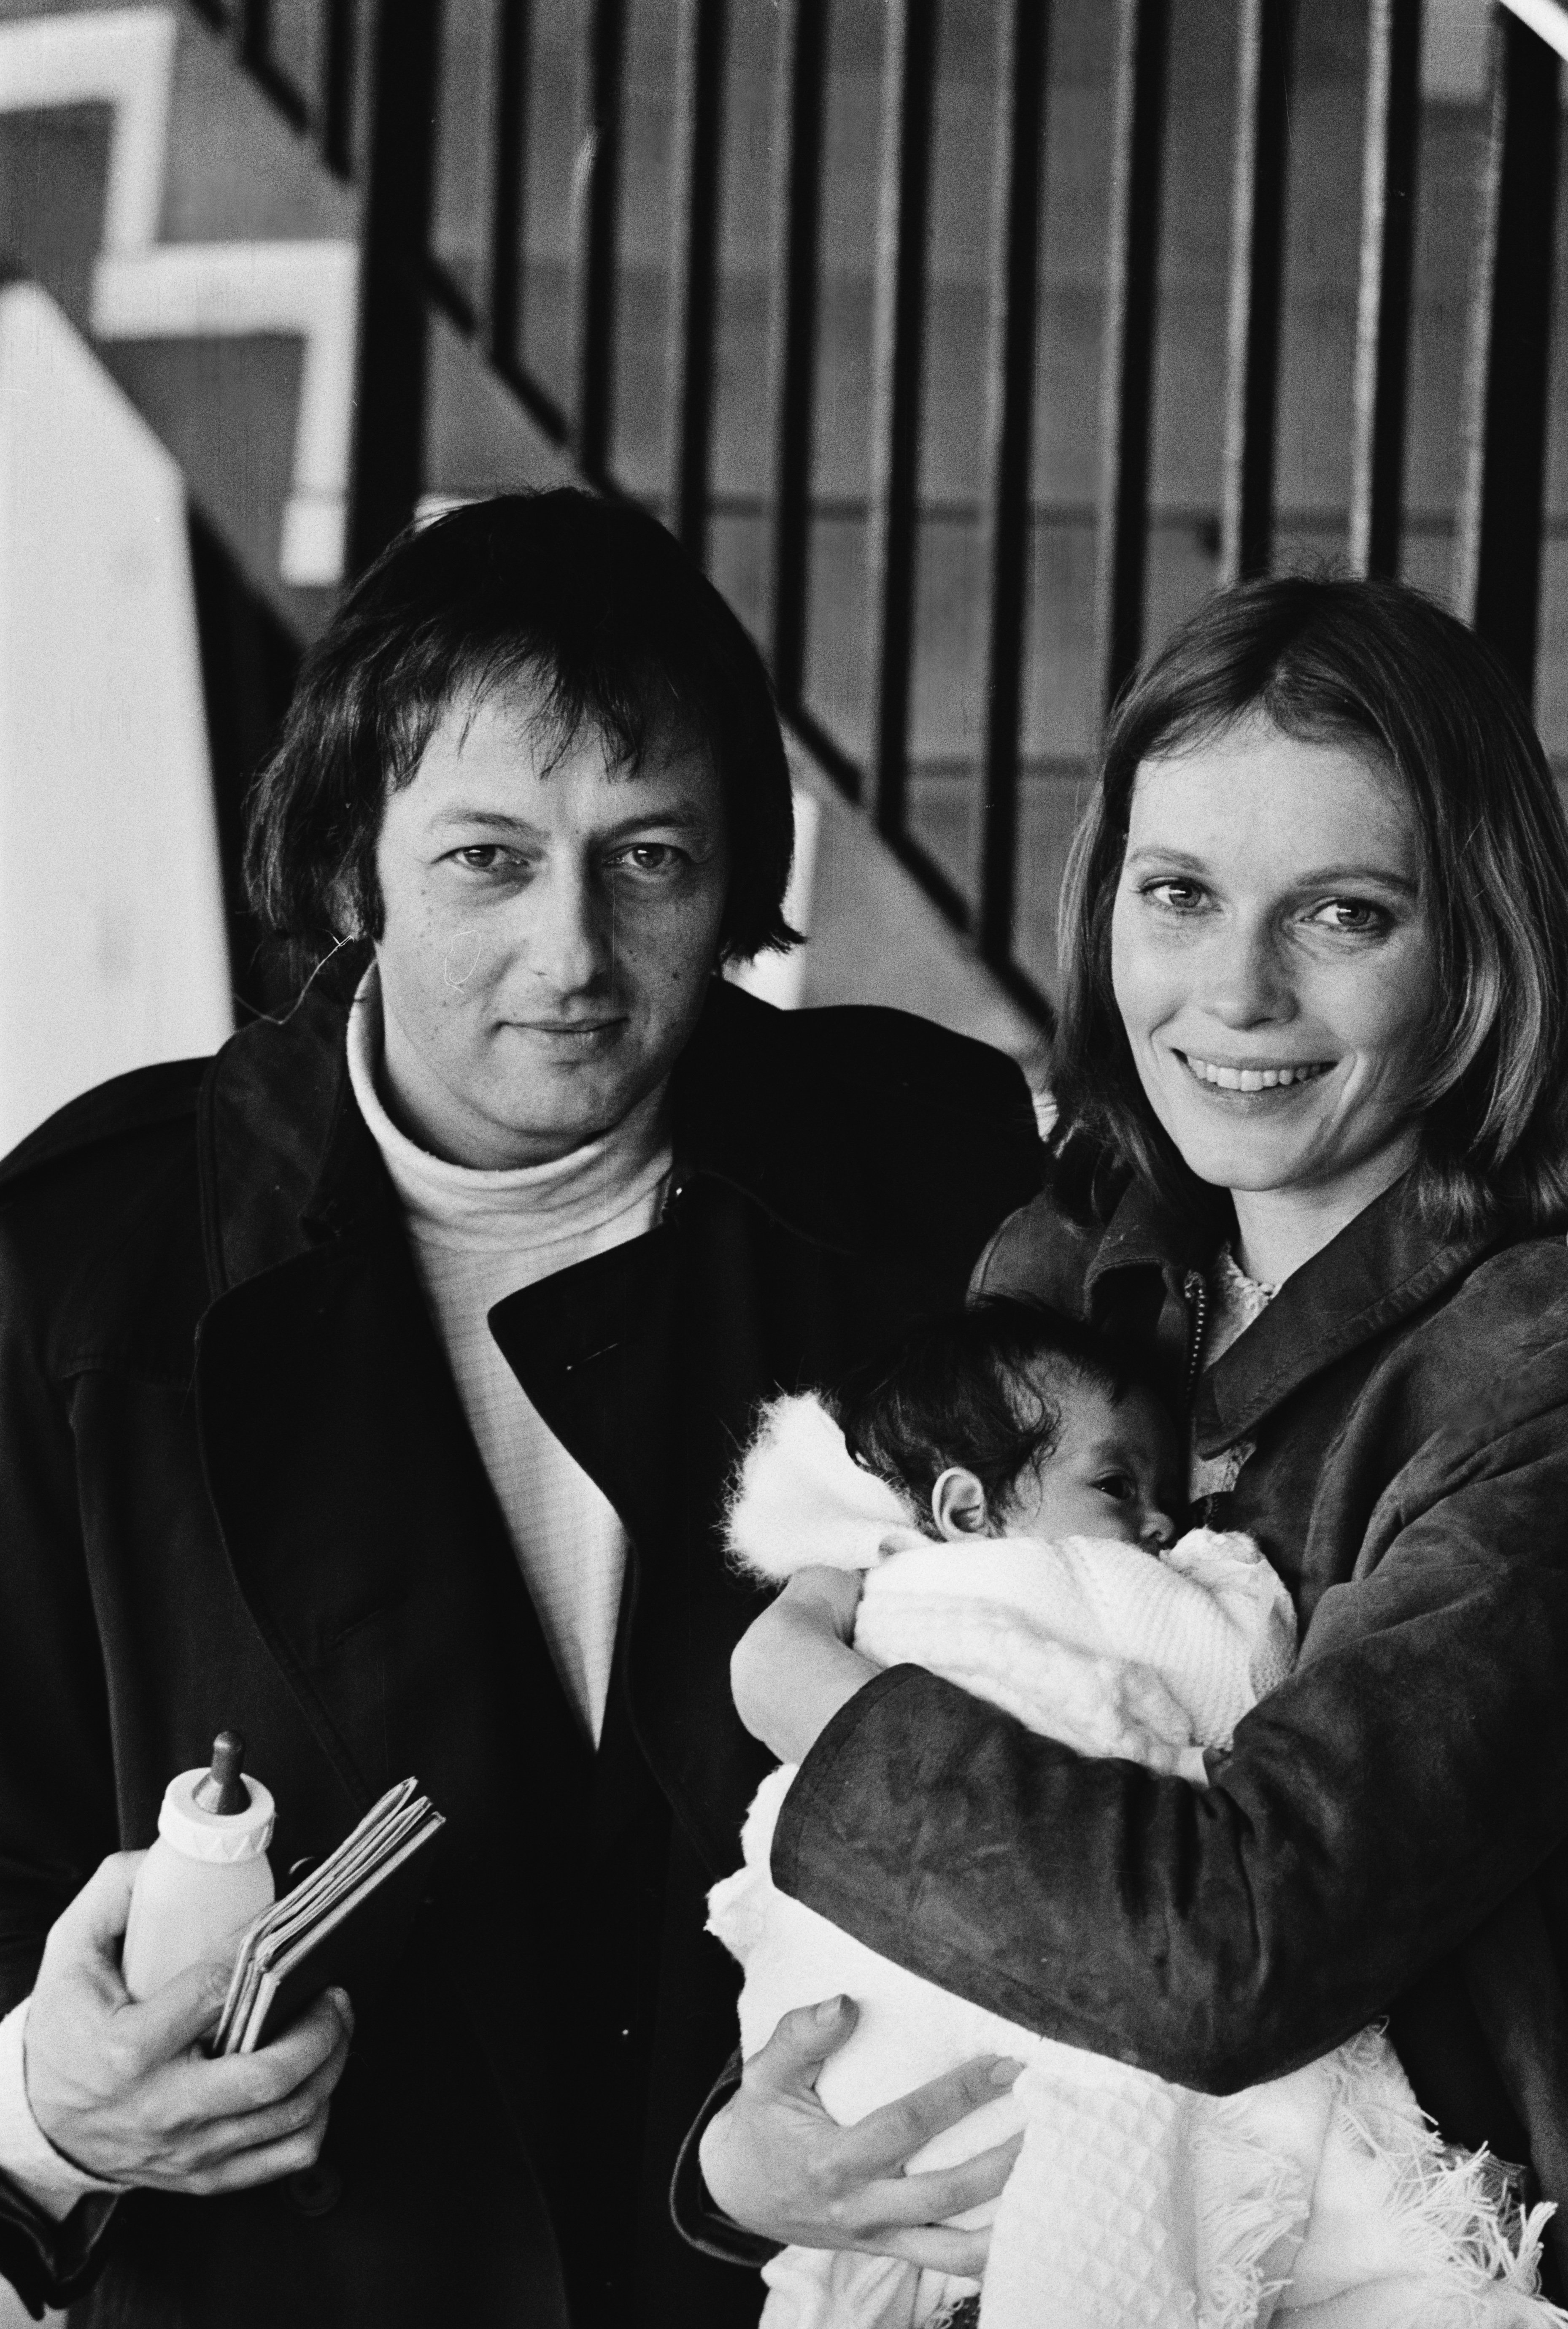 Andre Previn and Mia Farrow with their adopted daughter, Lark Previn, in 1973. | Source: Getty Images